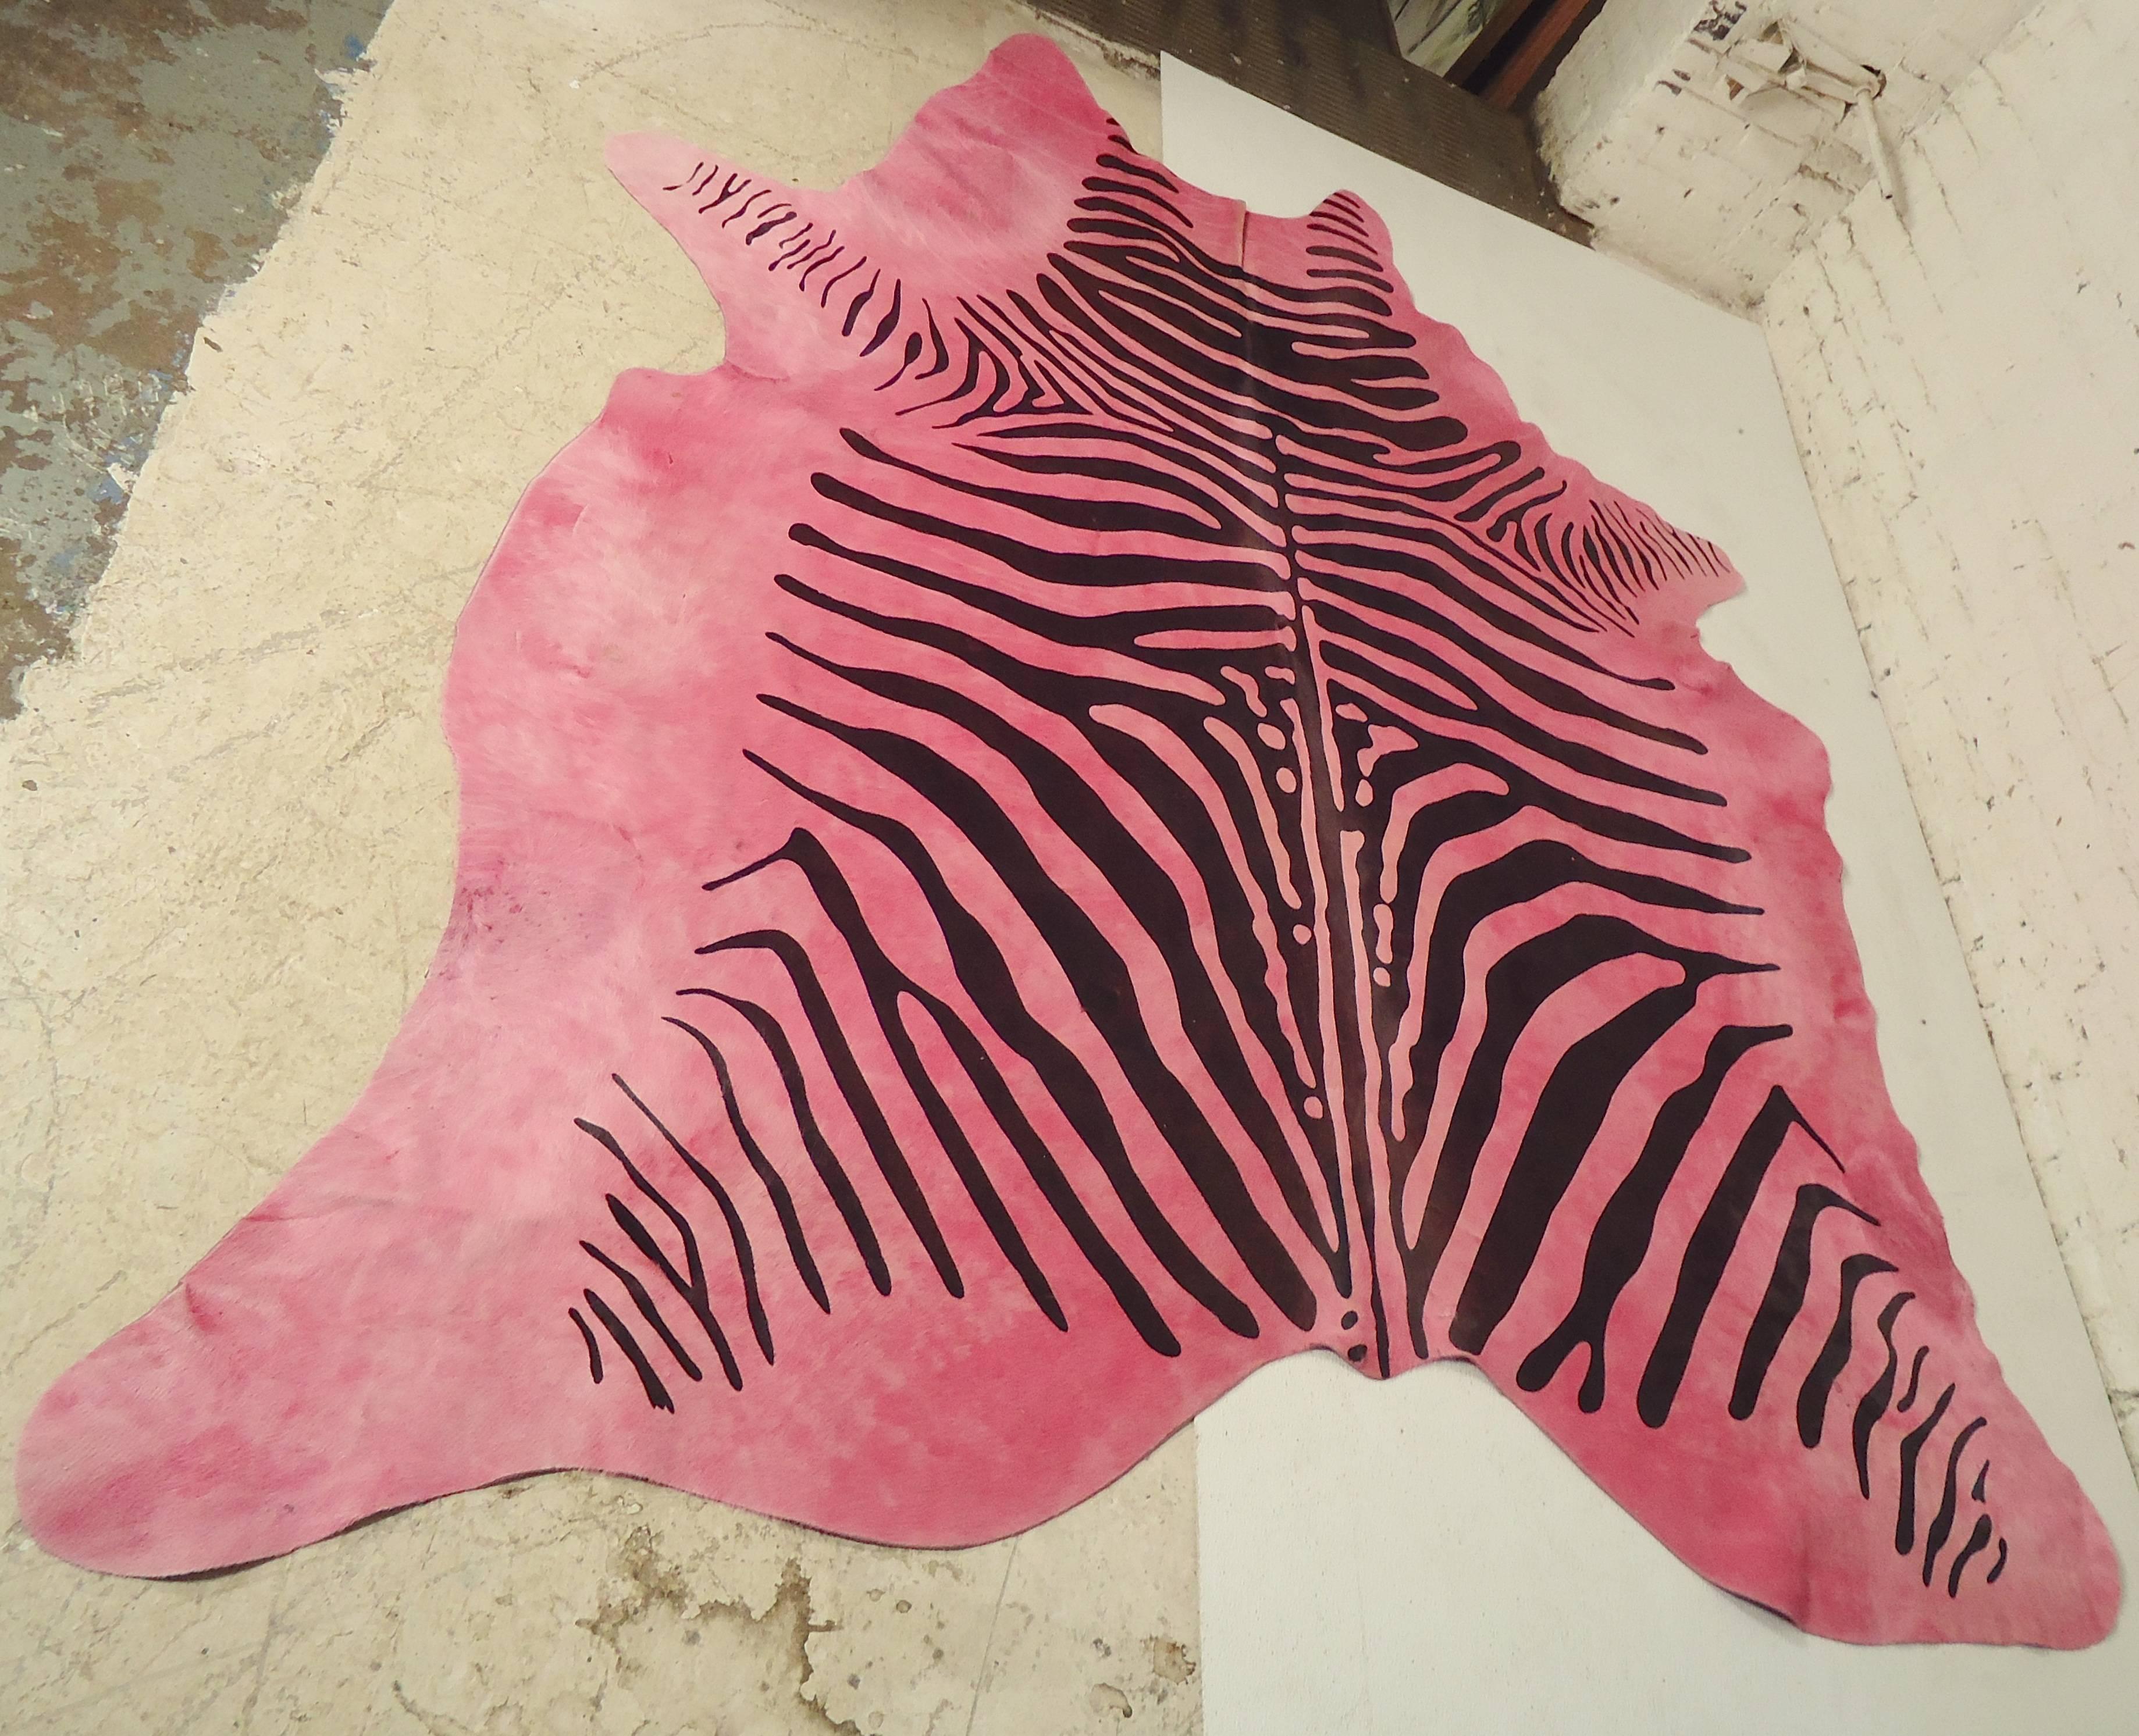 This fun zebra print rug has a wild pink color. Great contrast between the black and pink.

(Please confirm item location, NY or NJ, with dealer).
 